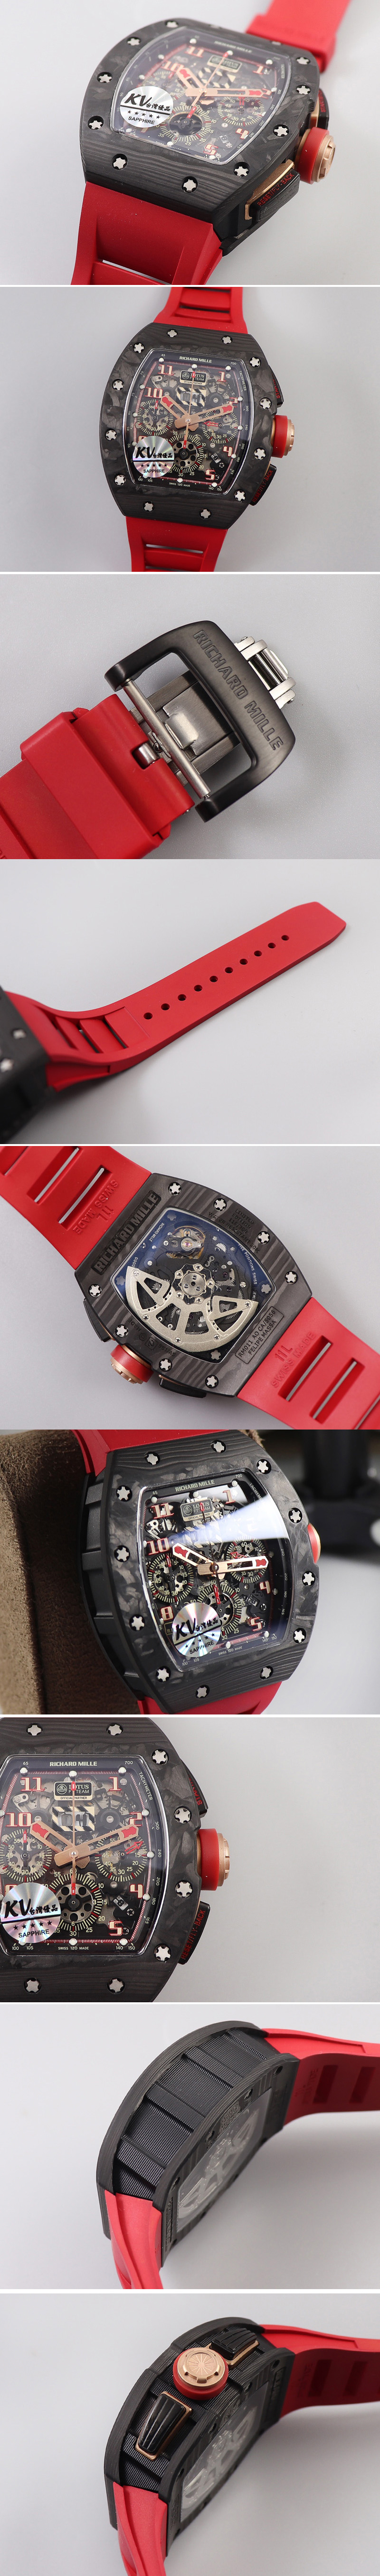 Replica Richard Mille RM011 NTPT Chrono Lotus KVF 1:1 Best Edition Crystal Dial on Red Rubber Strap A7750